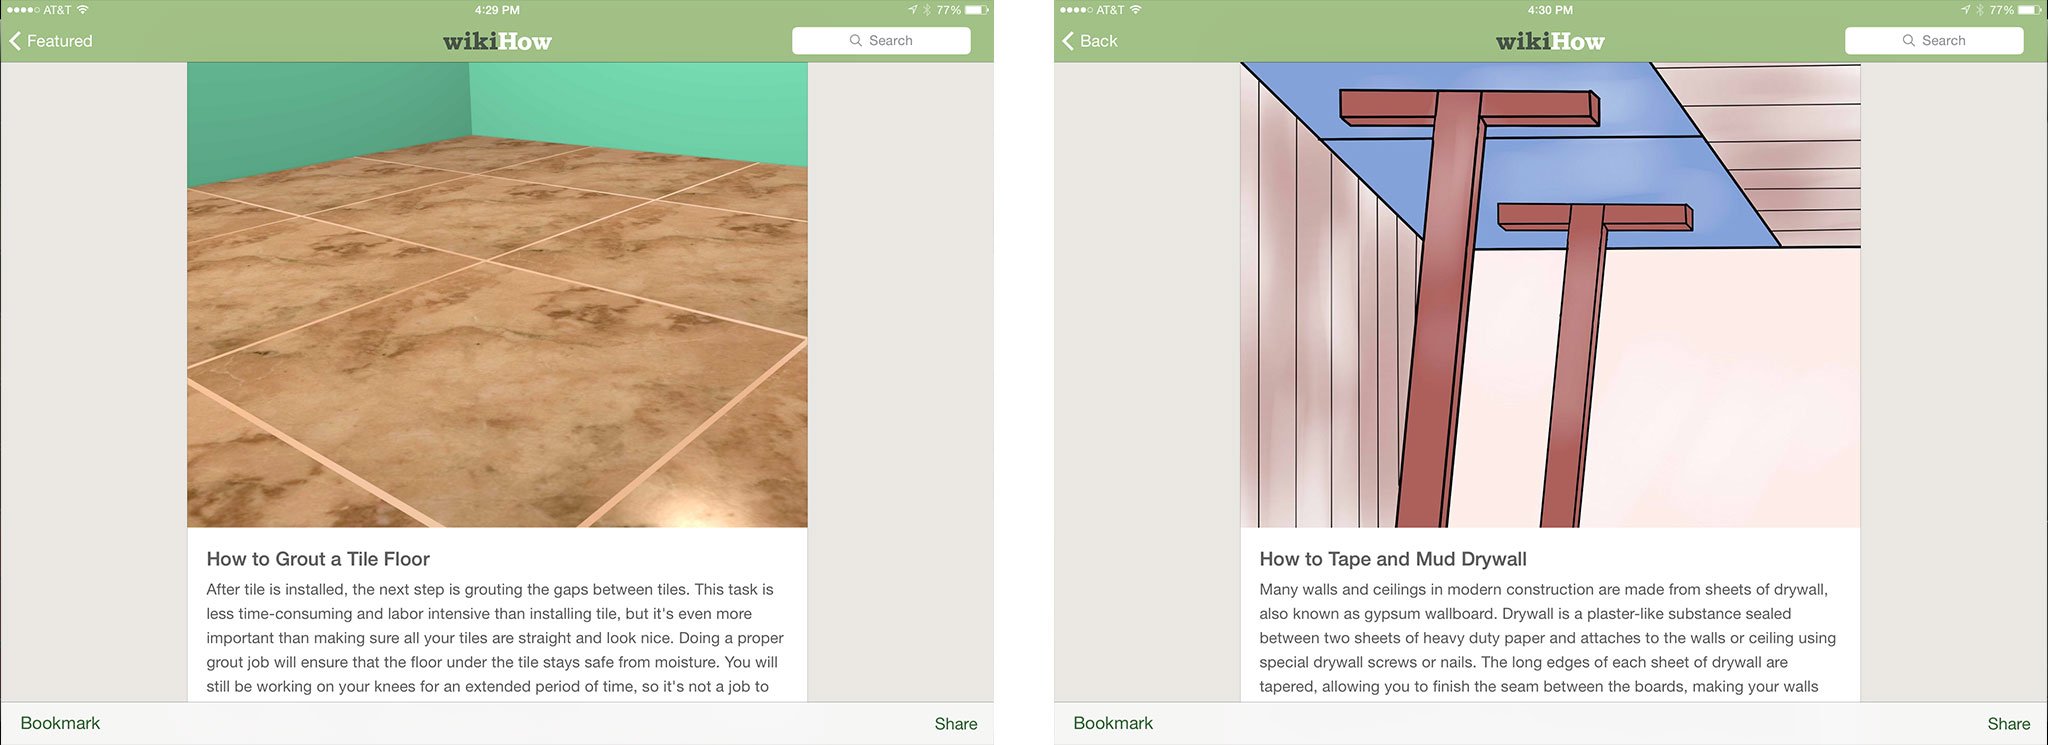 Best home design and improvement apps for iPad: wikiHow